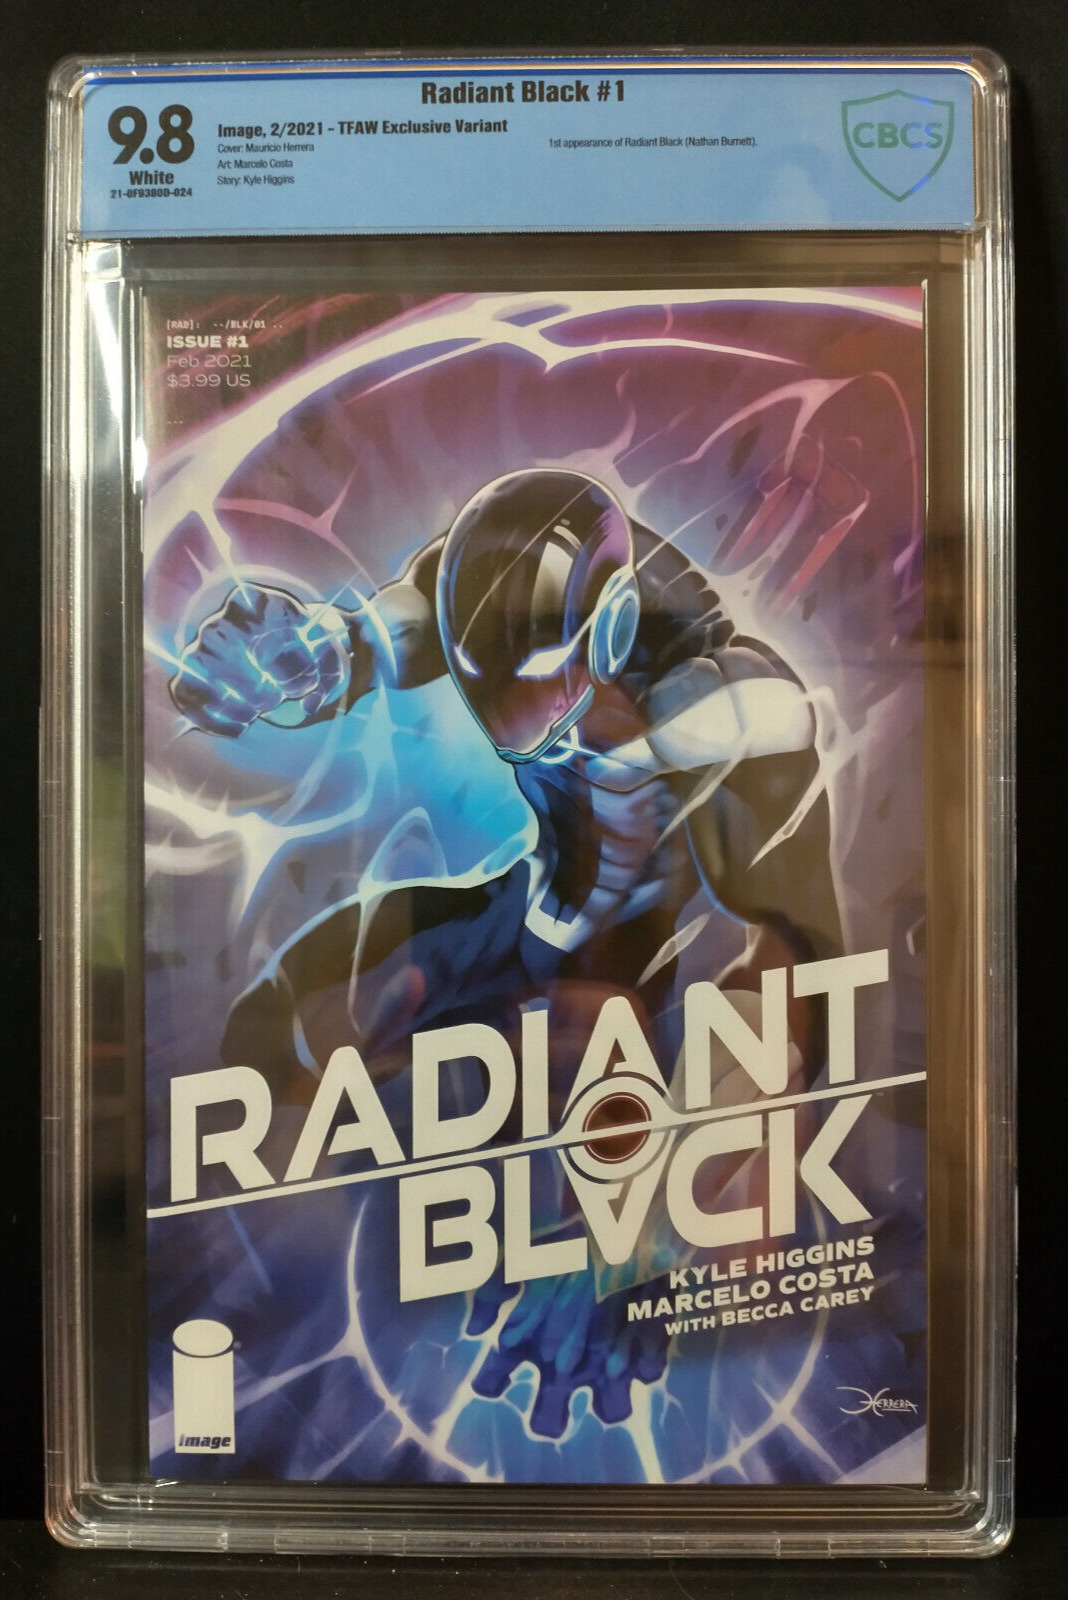 RADIANT BLACK #1 (Things From Another World Edition) 9.8 2021 CBCS not CGC IMAGE